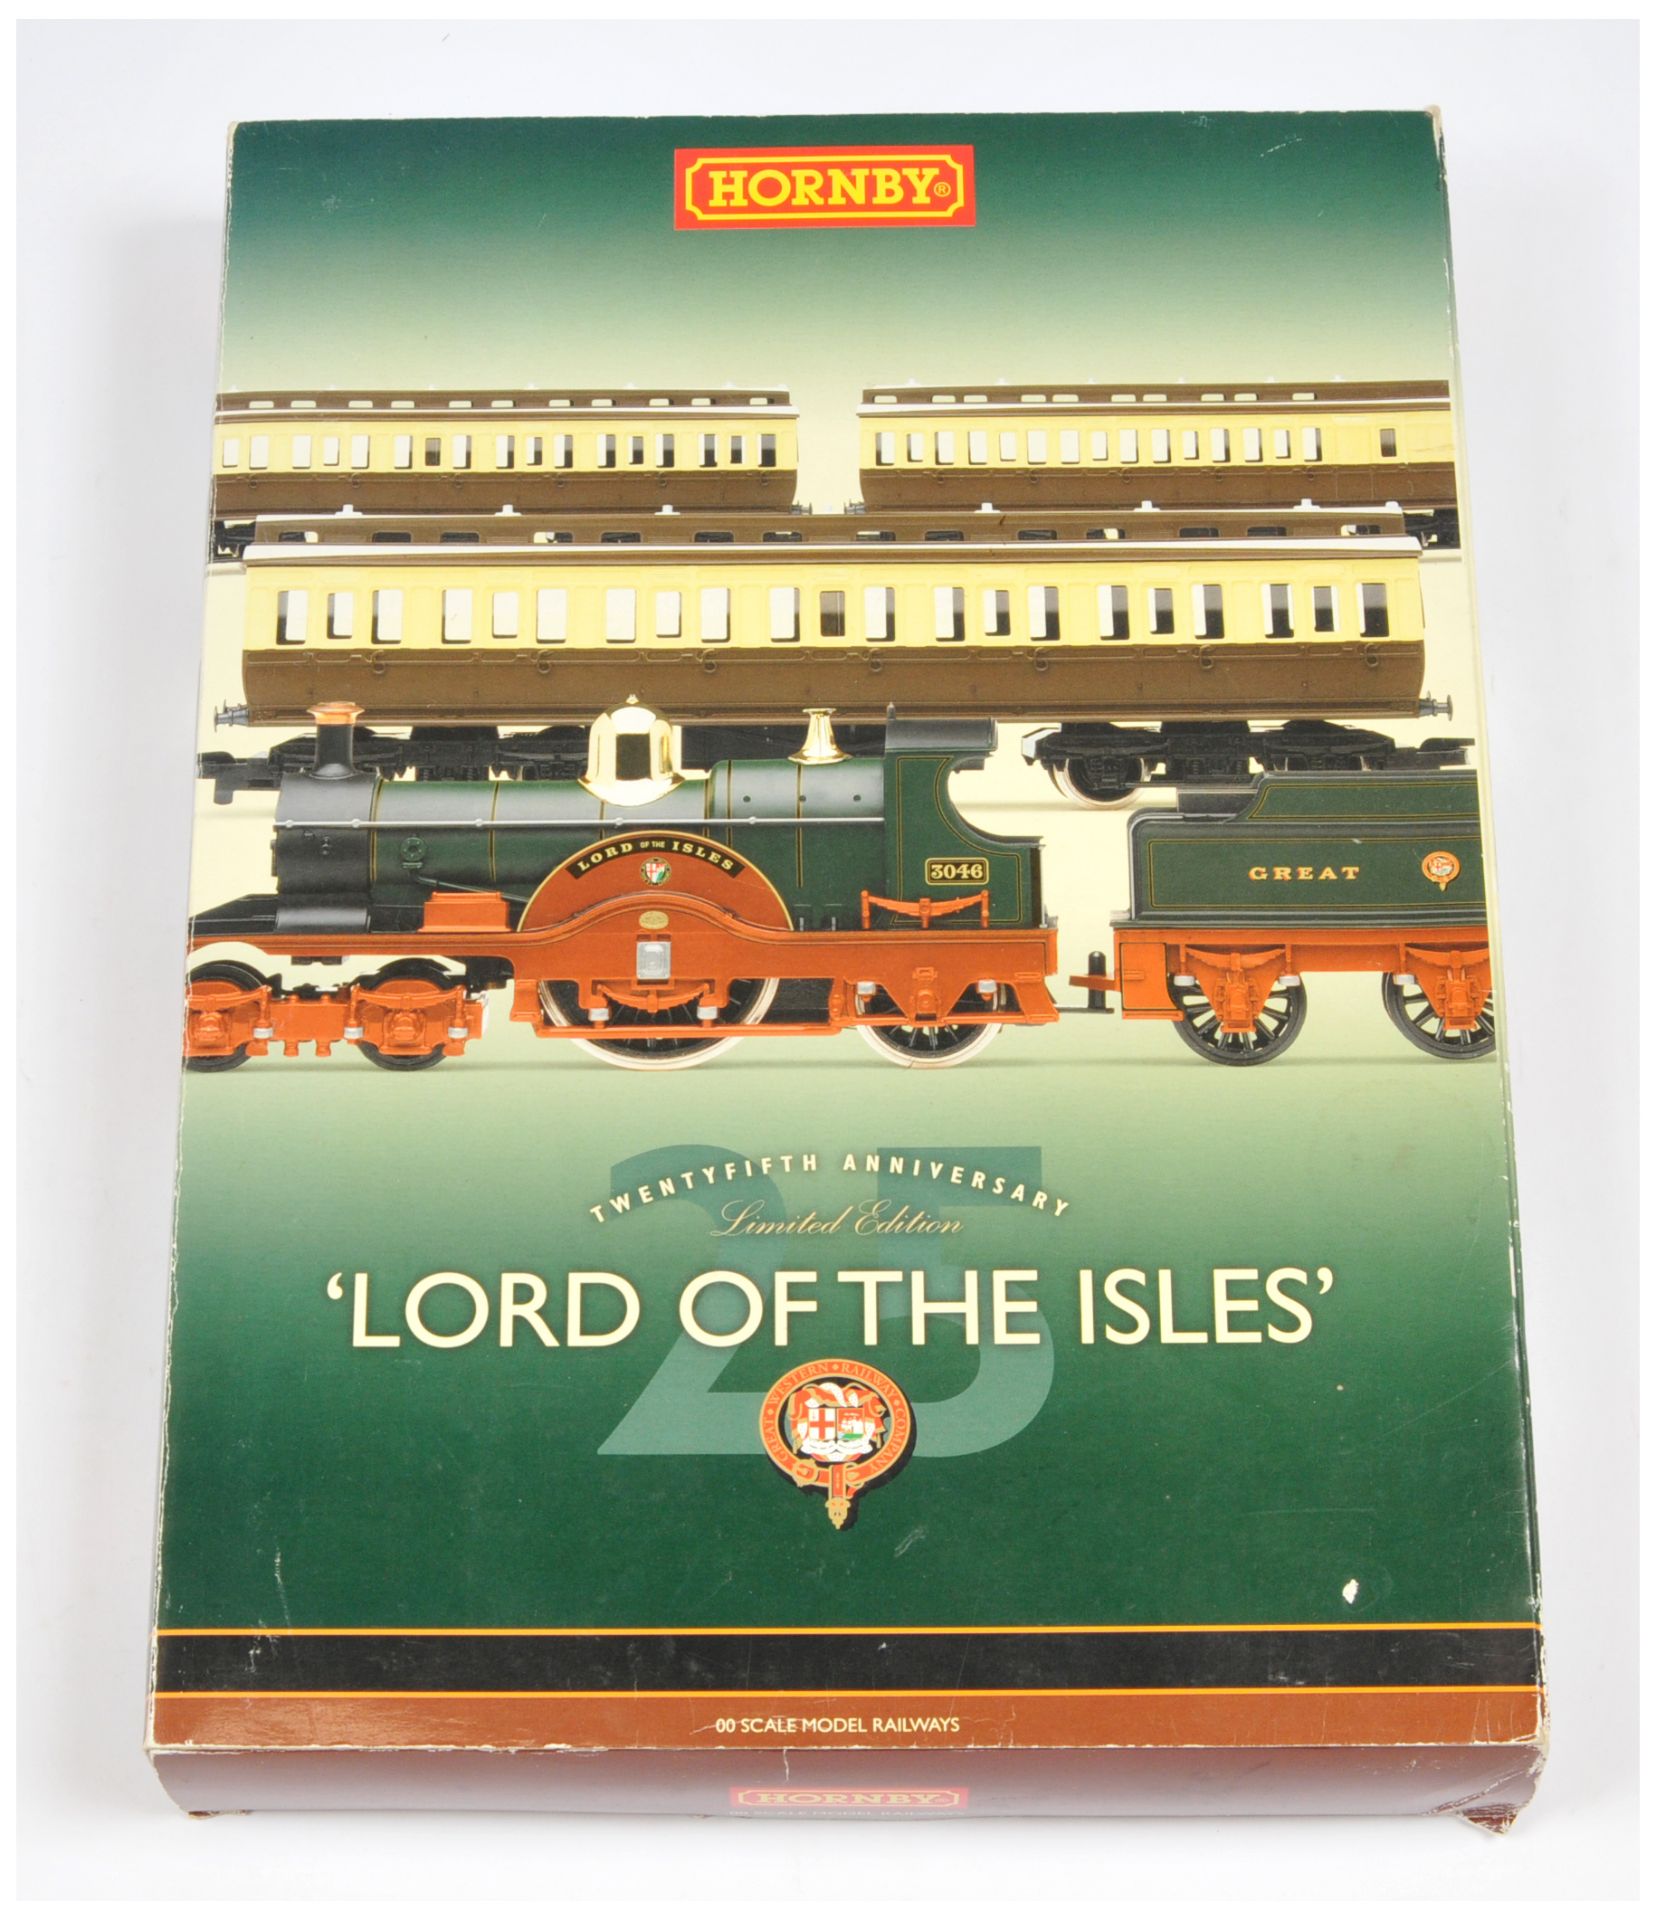 Hornby (China) R2560 (Limited Edition) "Lord of the Isles" Train Pack